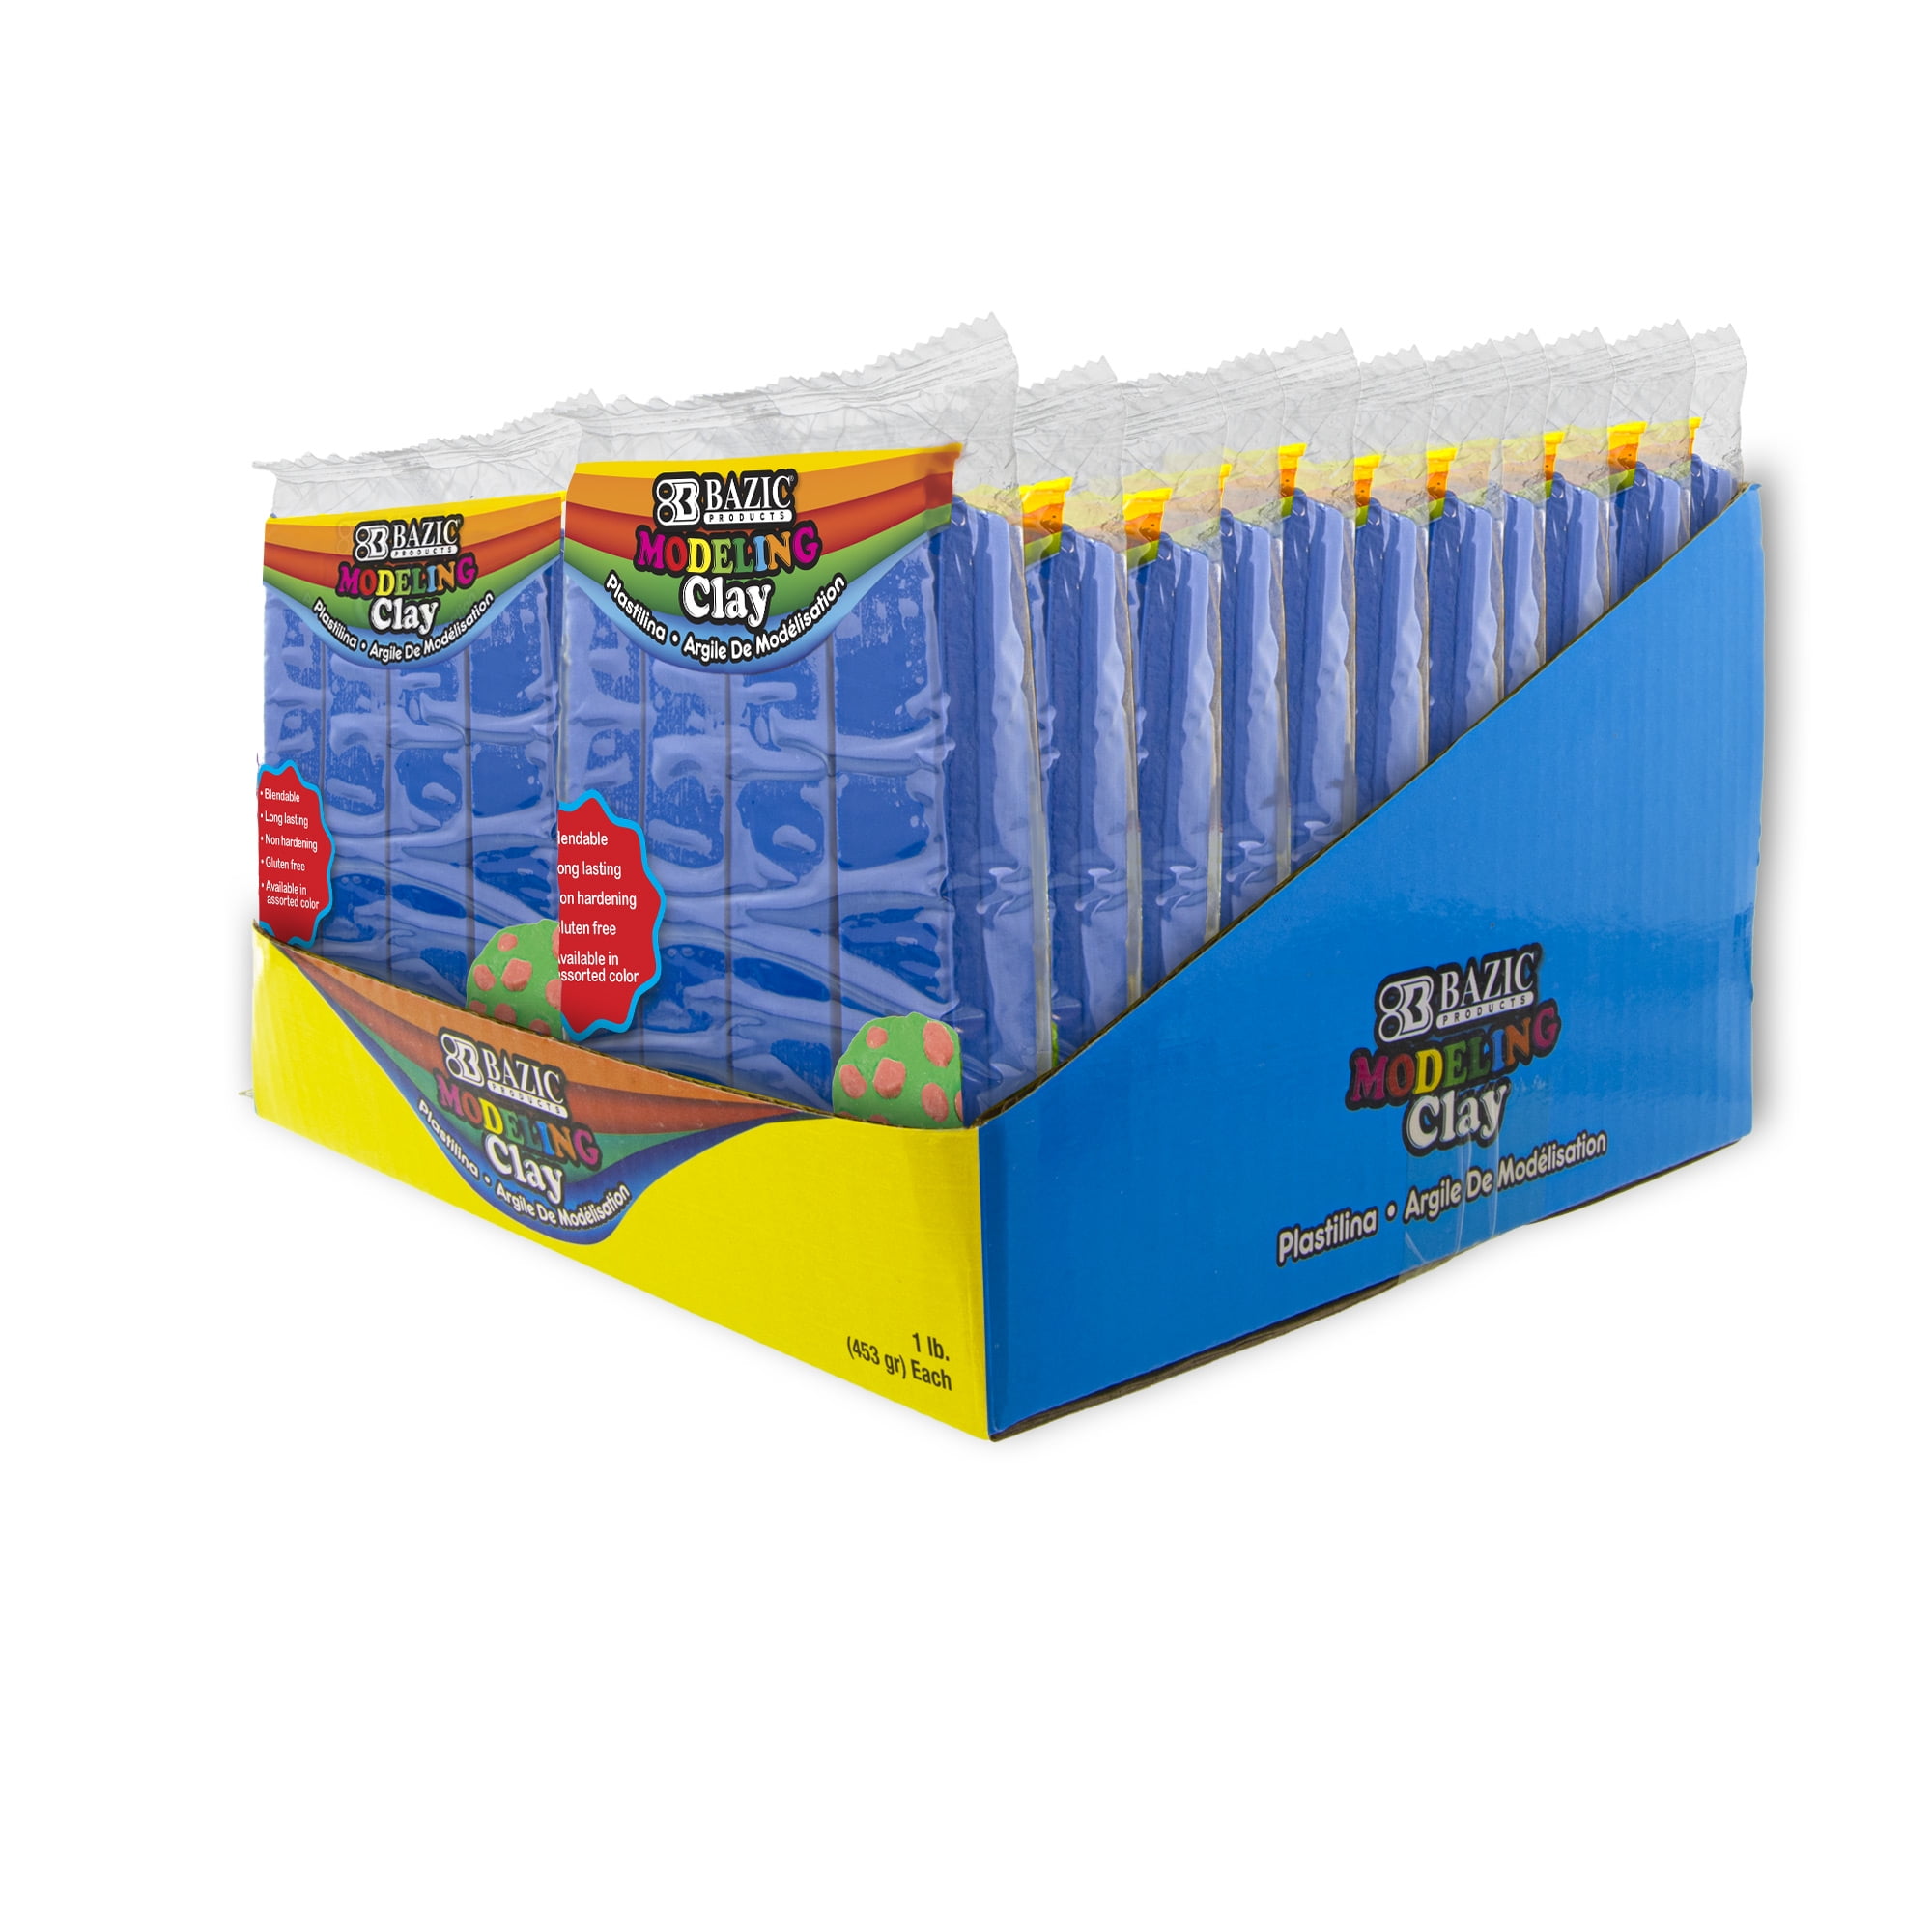 BAZIC 1 lb 24 Color Modeling Clay Sticks Bazic Products